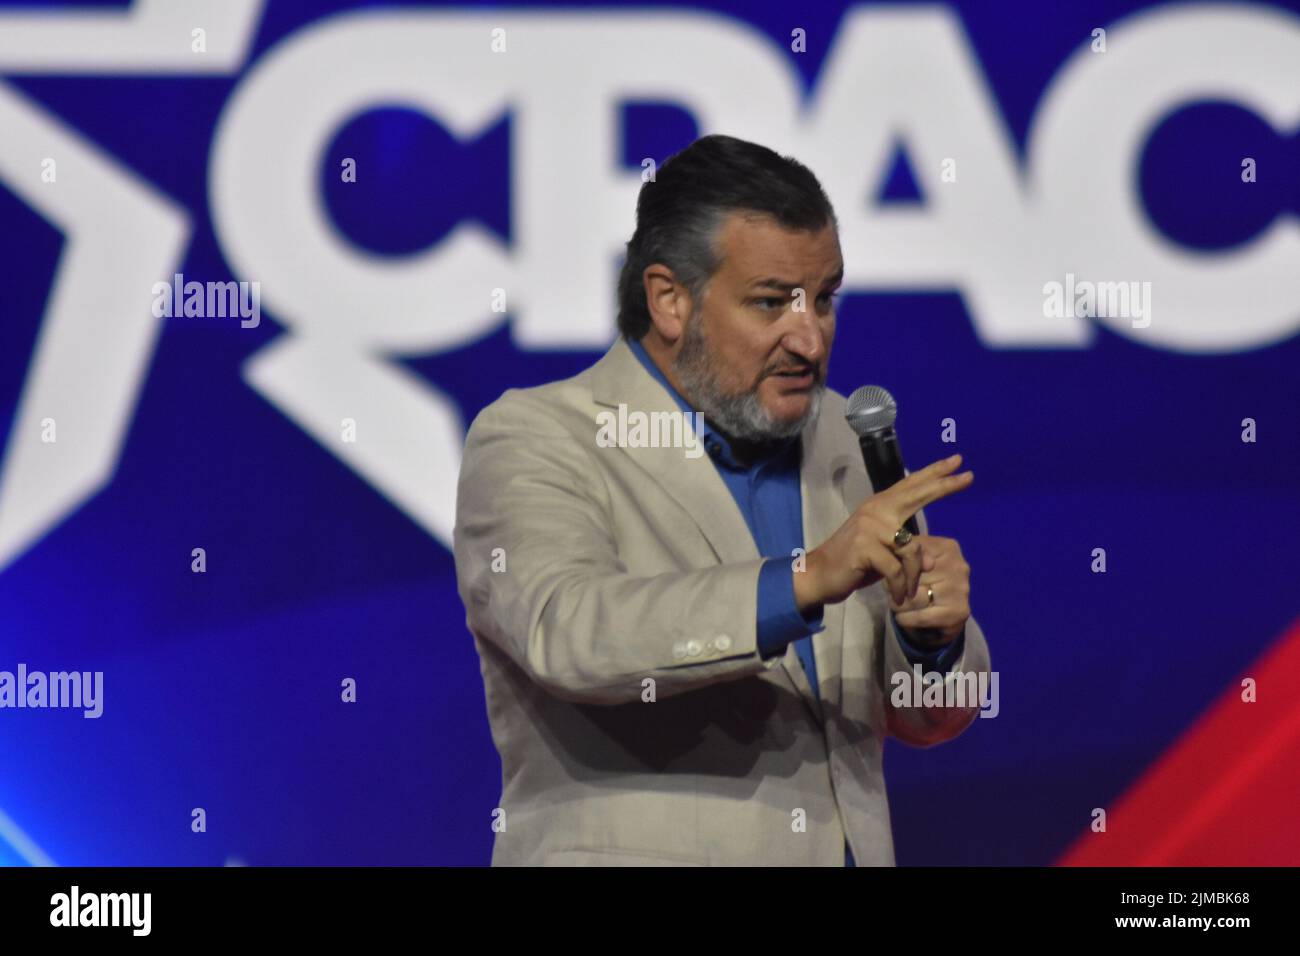 Dallas, Texas, USA. 5th Aug, 2022. (NEW) Ted Cruz delivers remarks at the Conservative Political Action Conference 2022 in Dallas, Texas. August 5, 2022, Dallas, TX, USA. Ted Cruz delivers remarks during the Conservative Political Action Conference (CPAC), held in the state of Texas, in United States, on Friday (5). Ted Cruz is an American politician and attorney serving as the junior United States senator for Texas since 2013. A member of the Republican Party, Cruz served as Solicitor General of Texas from 2003 to 2008. The conference is broadcast live on the CPAC website and online on Fox N Stock Photo